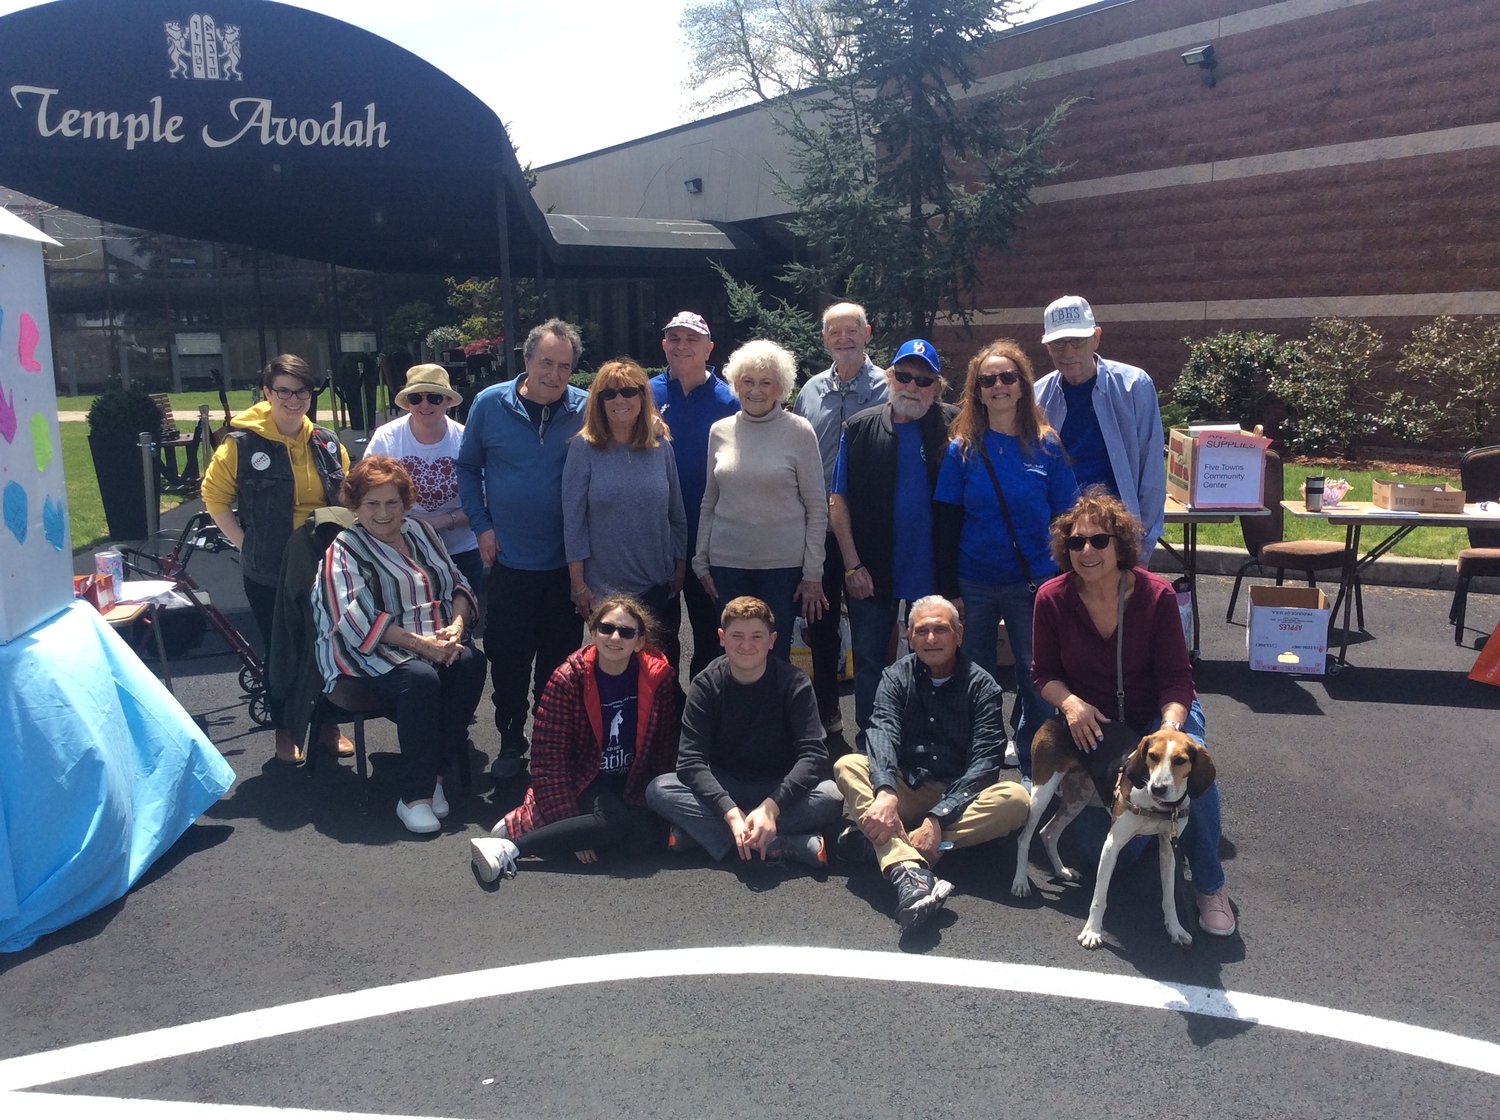 Sunday, May 1, was a beautiful day to do good deeds at Temple Avodah.